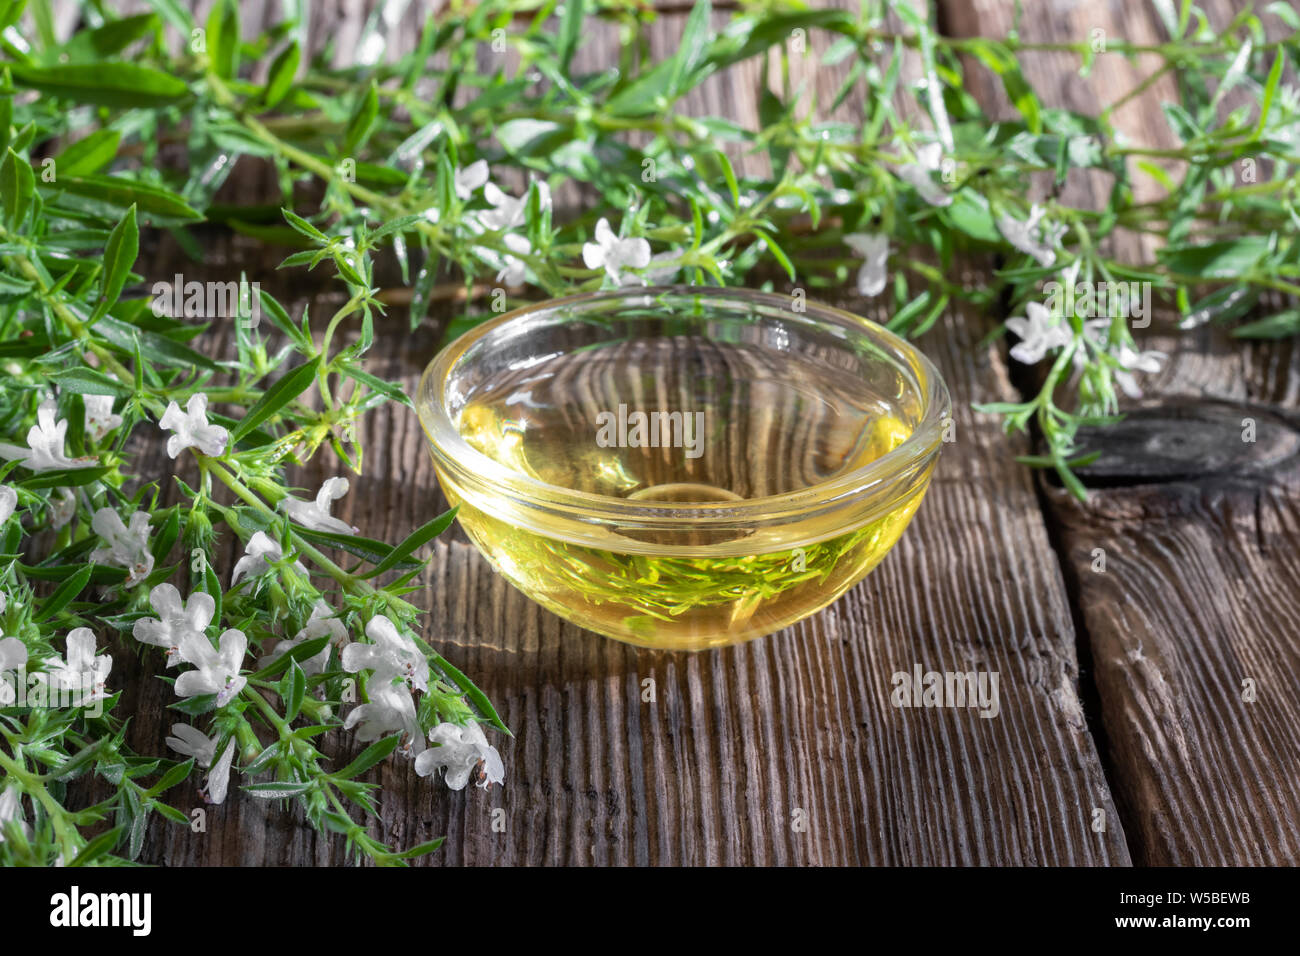 A bowl of mountain savory essential oil with blooming Satureja montana plant Stock Photo